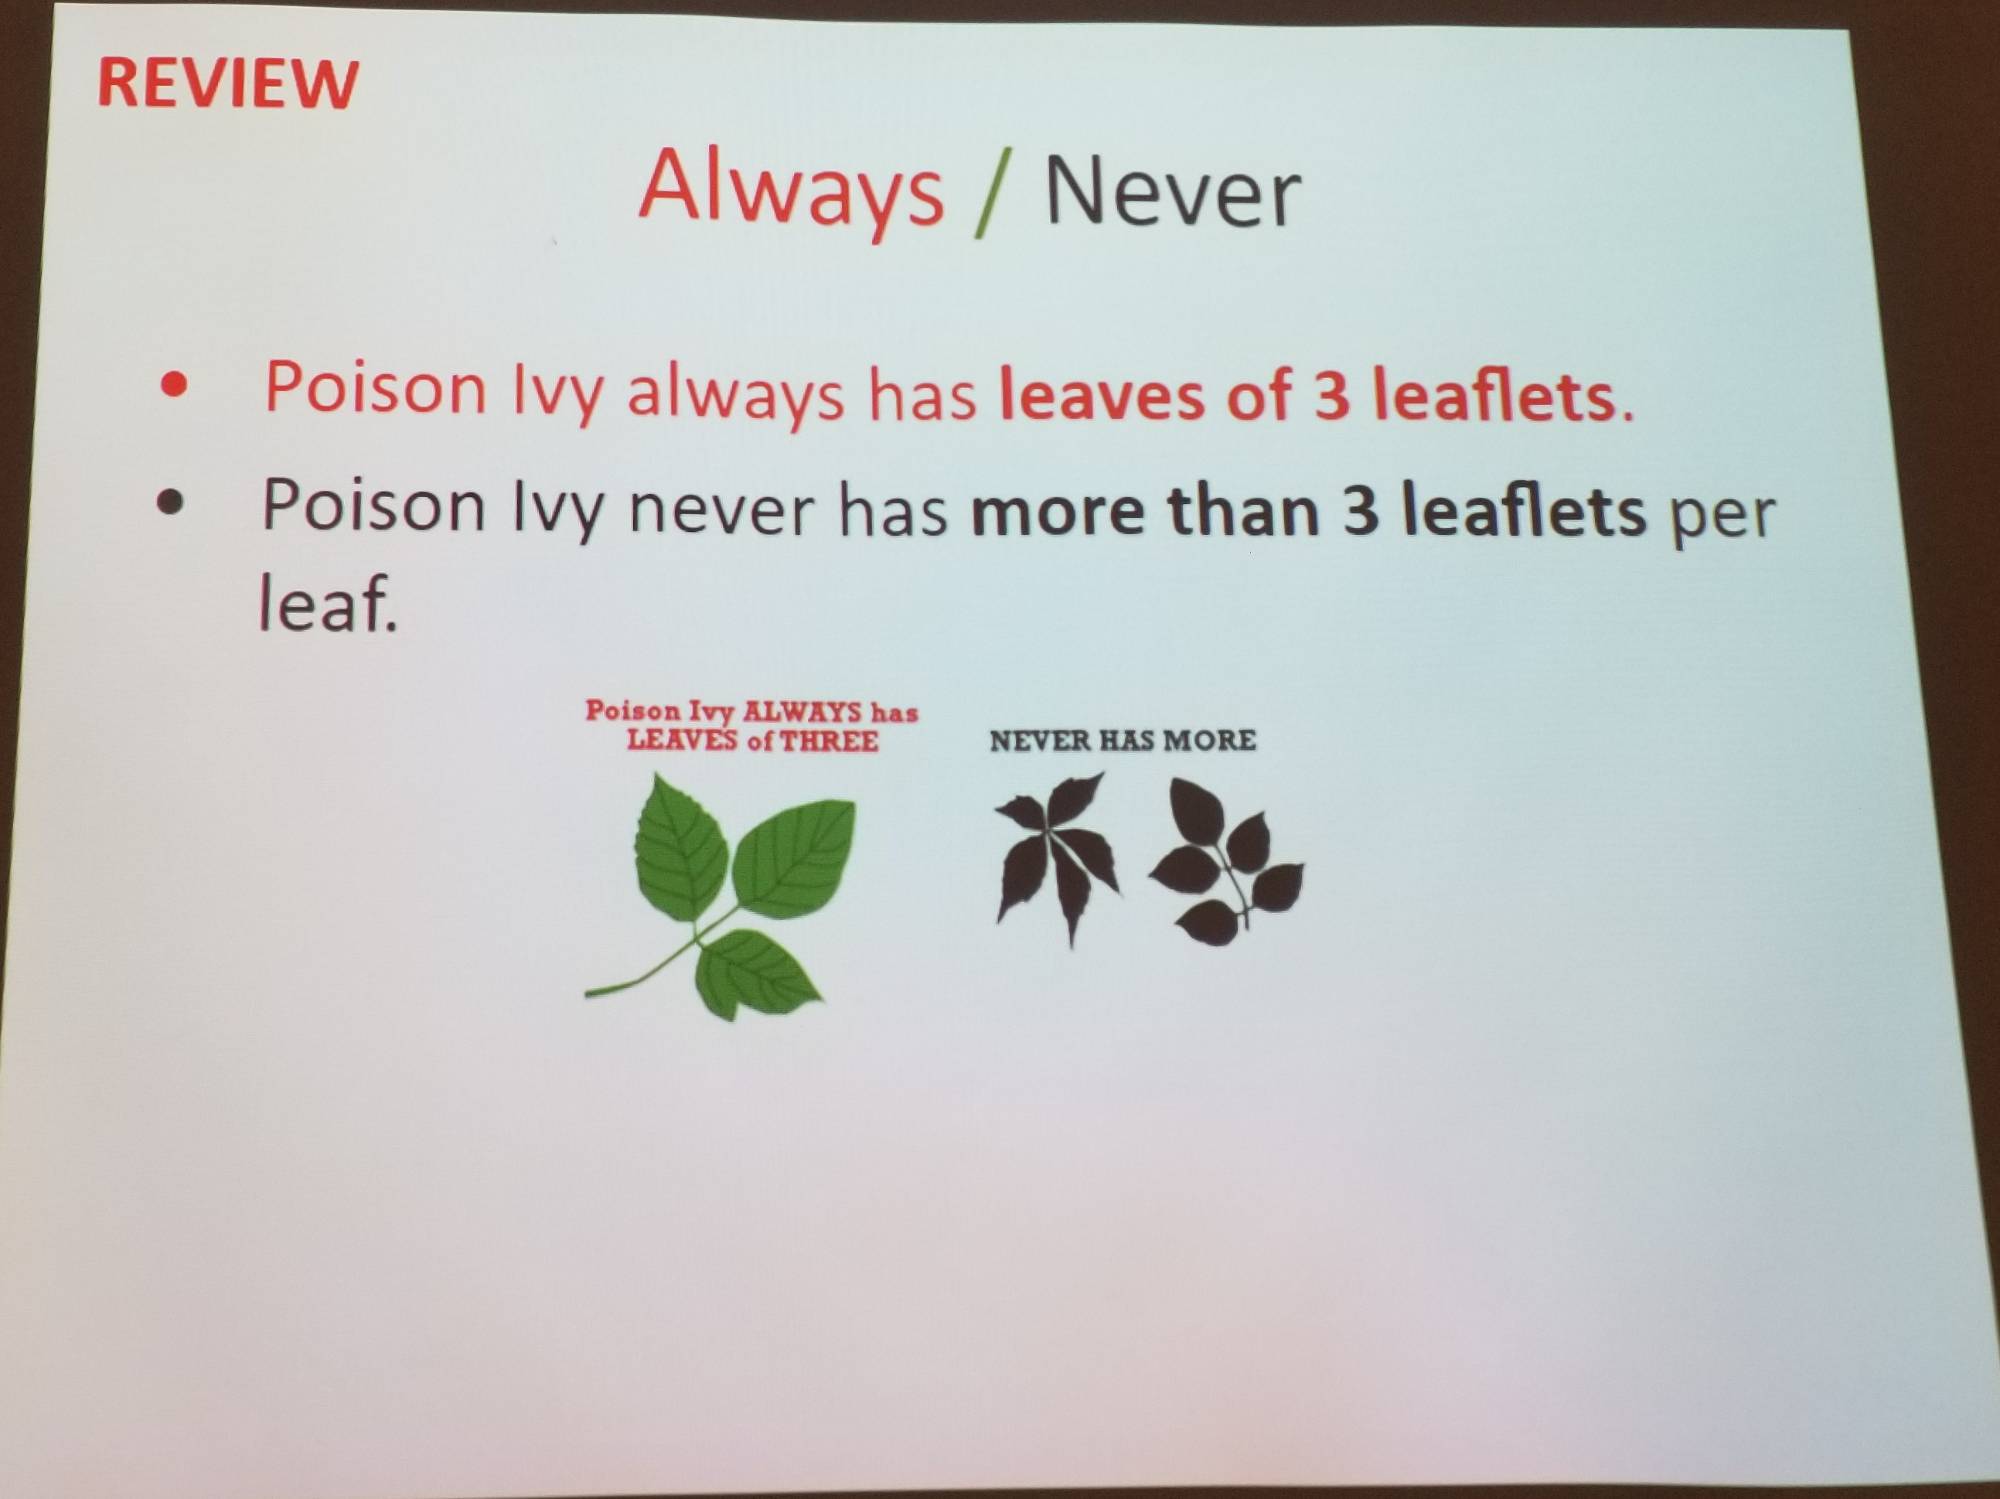 Poison ivy always has leaves of 3 leaflets. Poison ivy never has more than 3 leaflets per leaf.